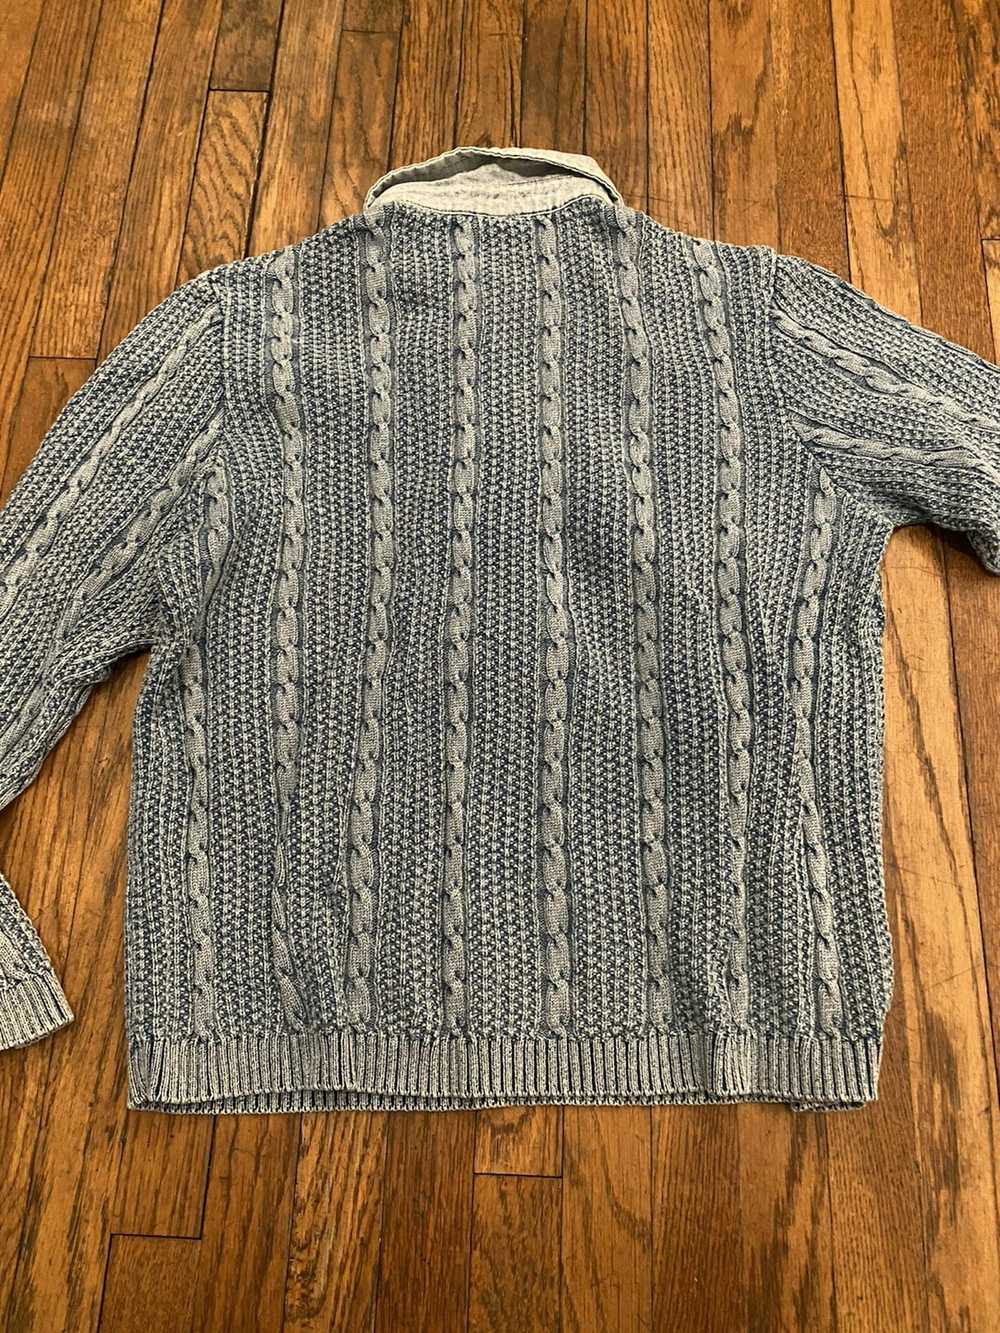 Other Cable knit indigo sweater - image 2